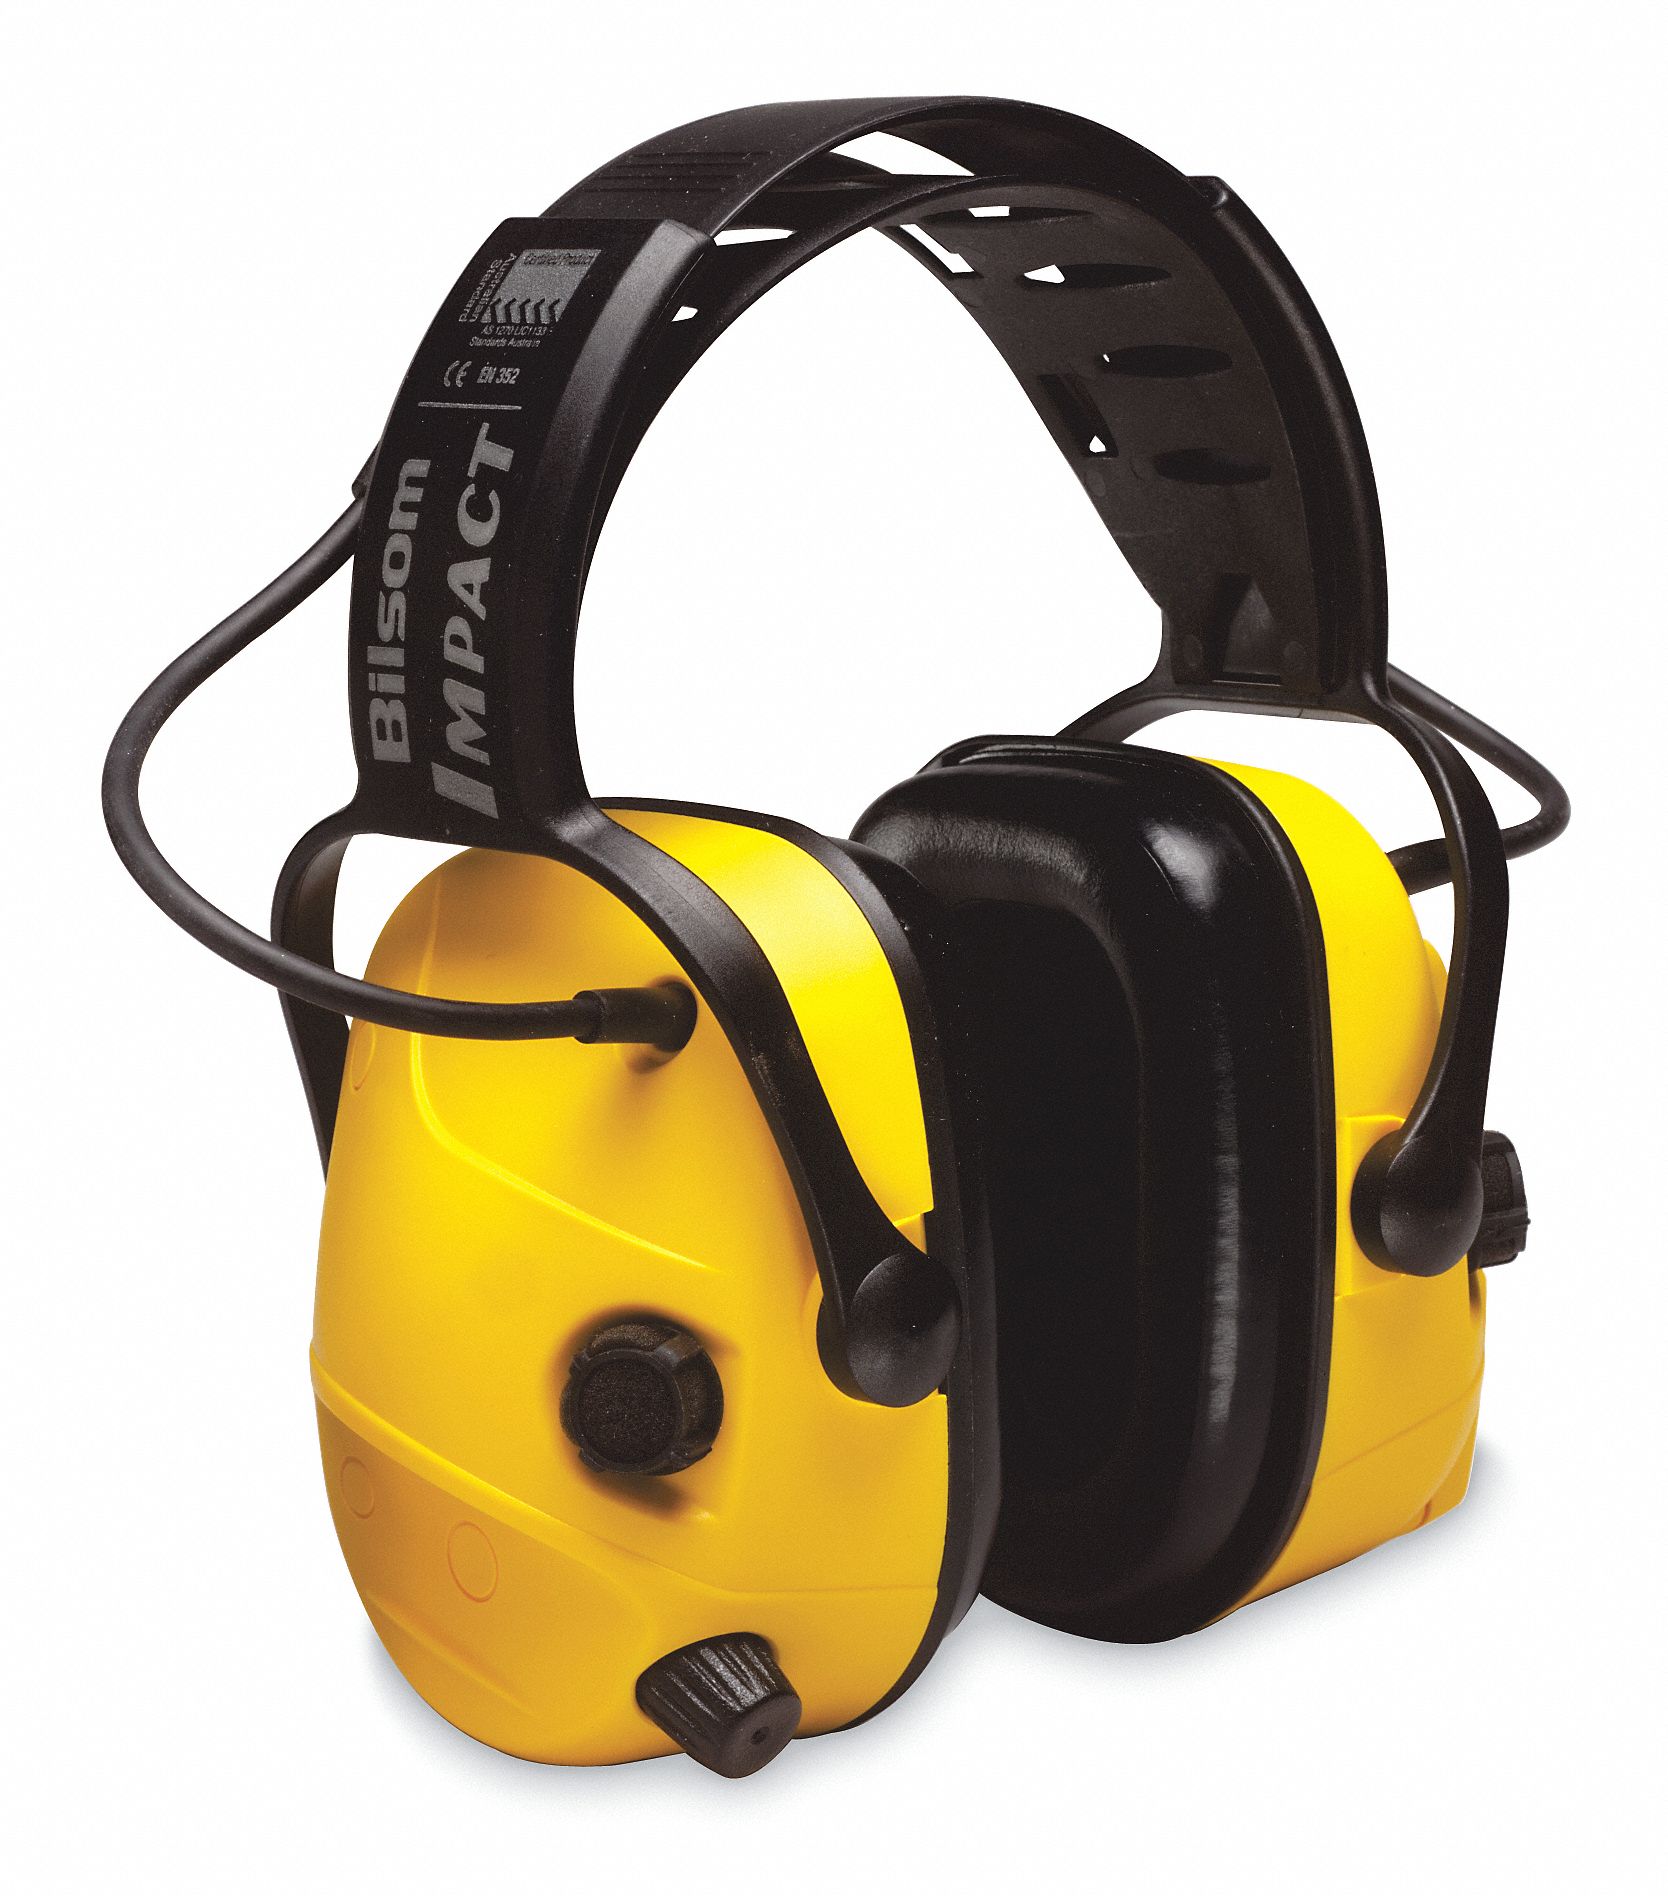 Ear Muffs Hearing Protection Noise Reduction Safety Sound Yellow 